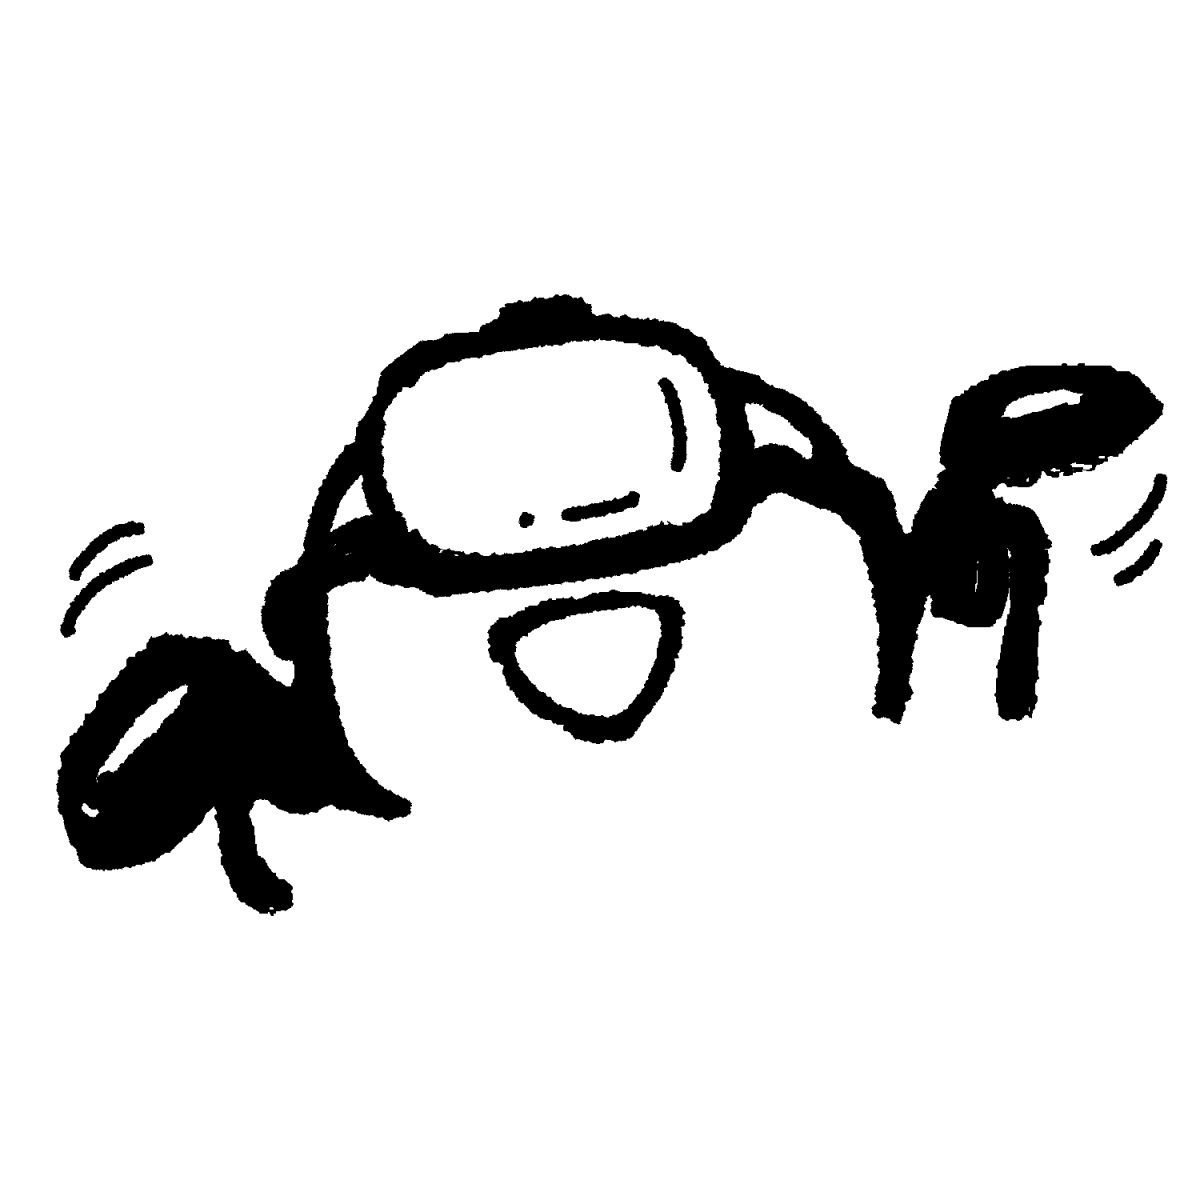 VRヘッドセットで遊ぶのイラスト / Playing with a VR headset Illustration